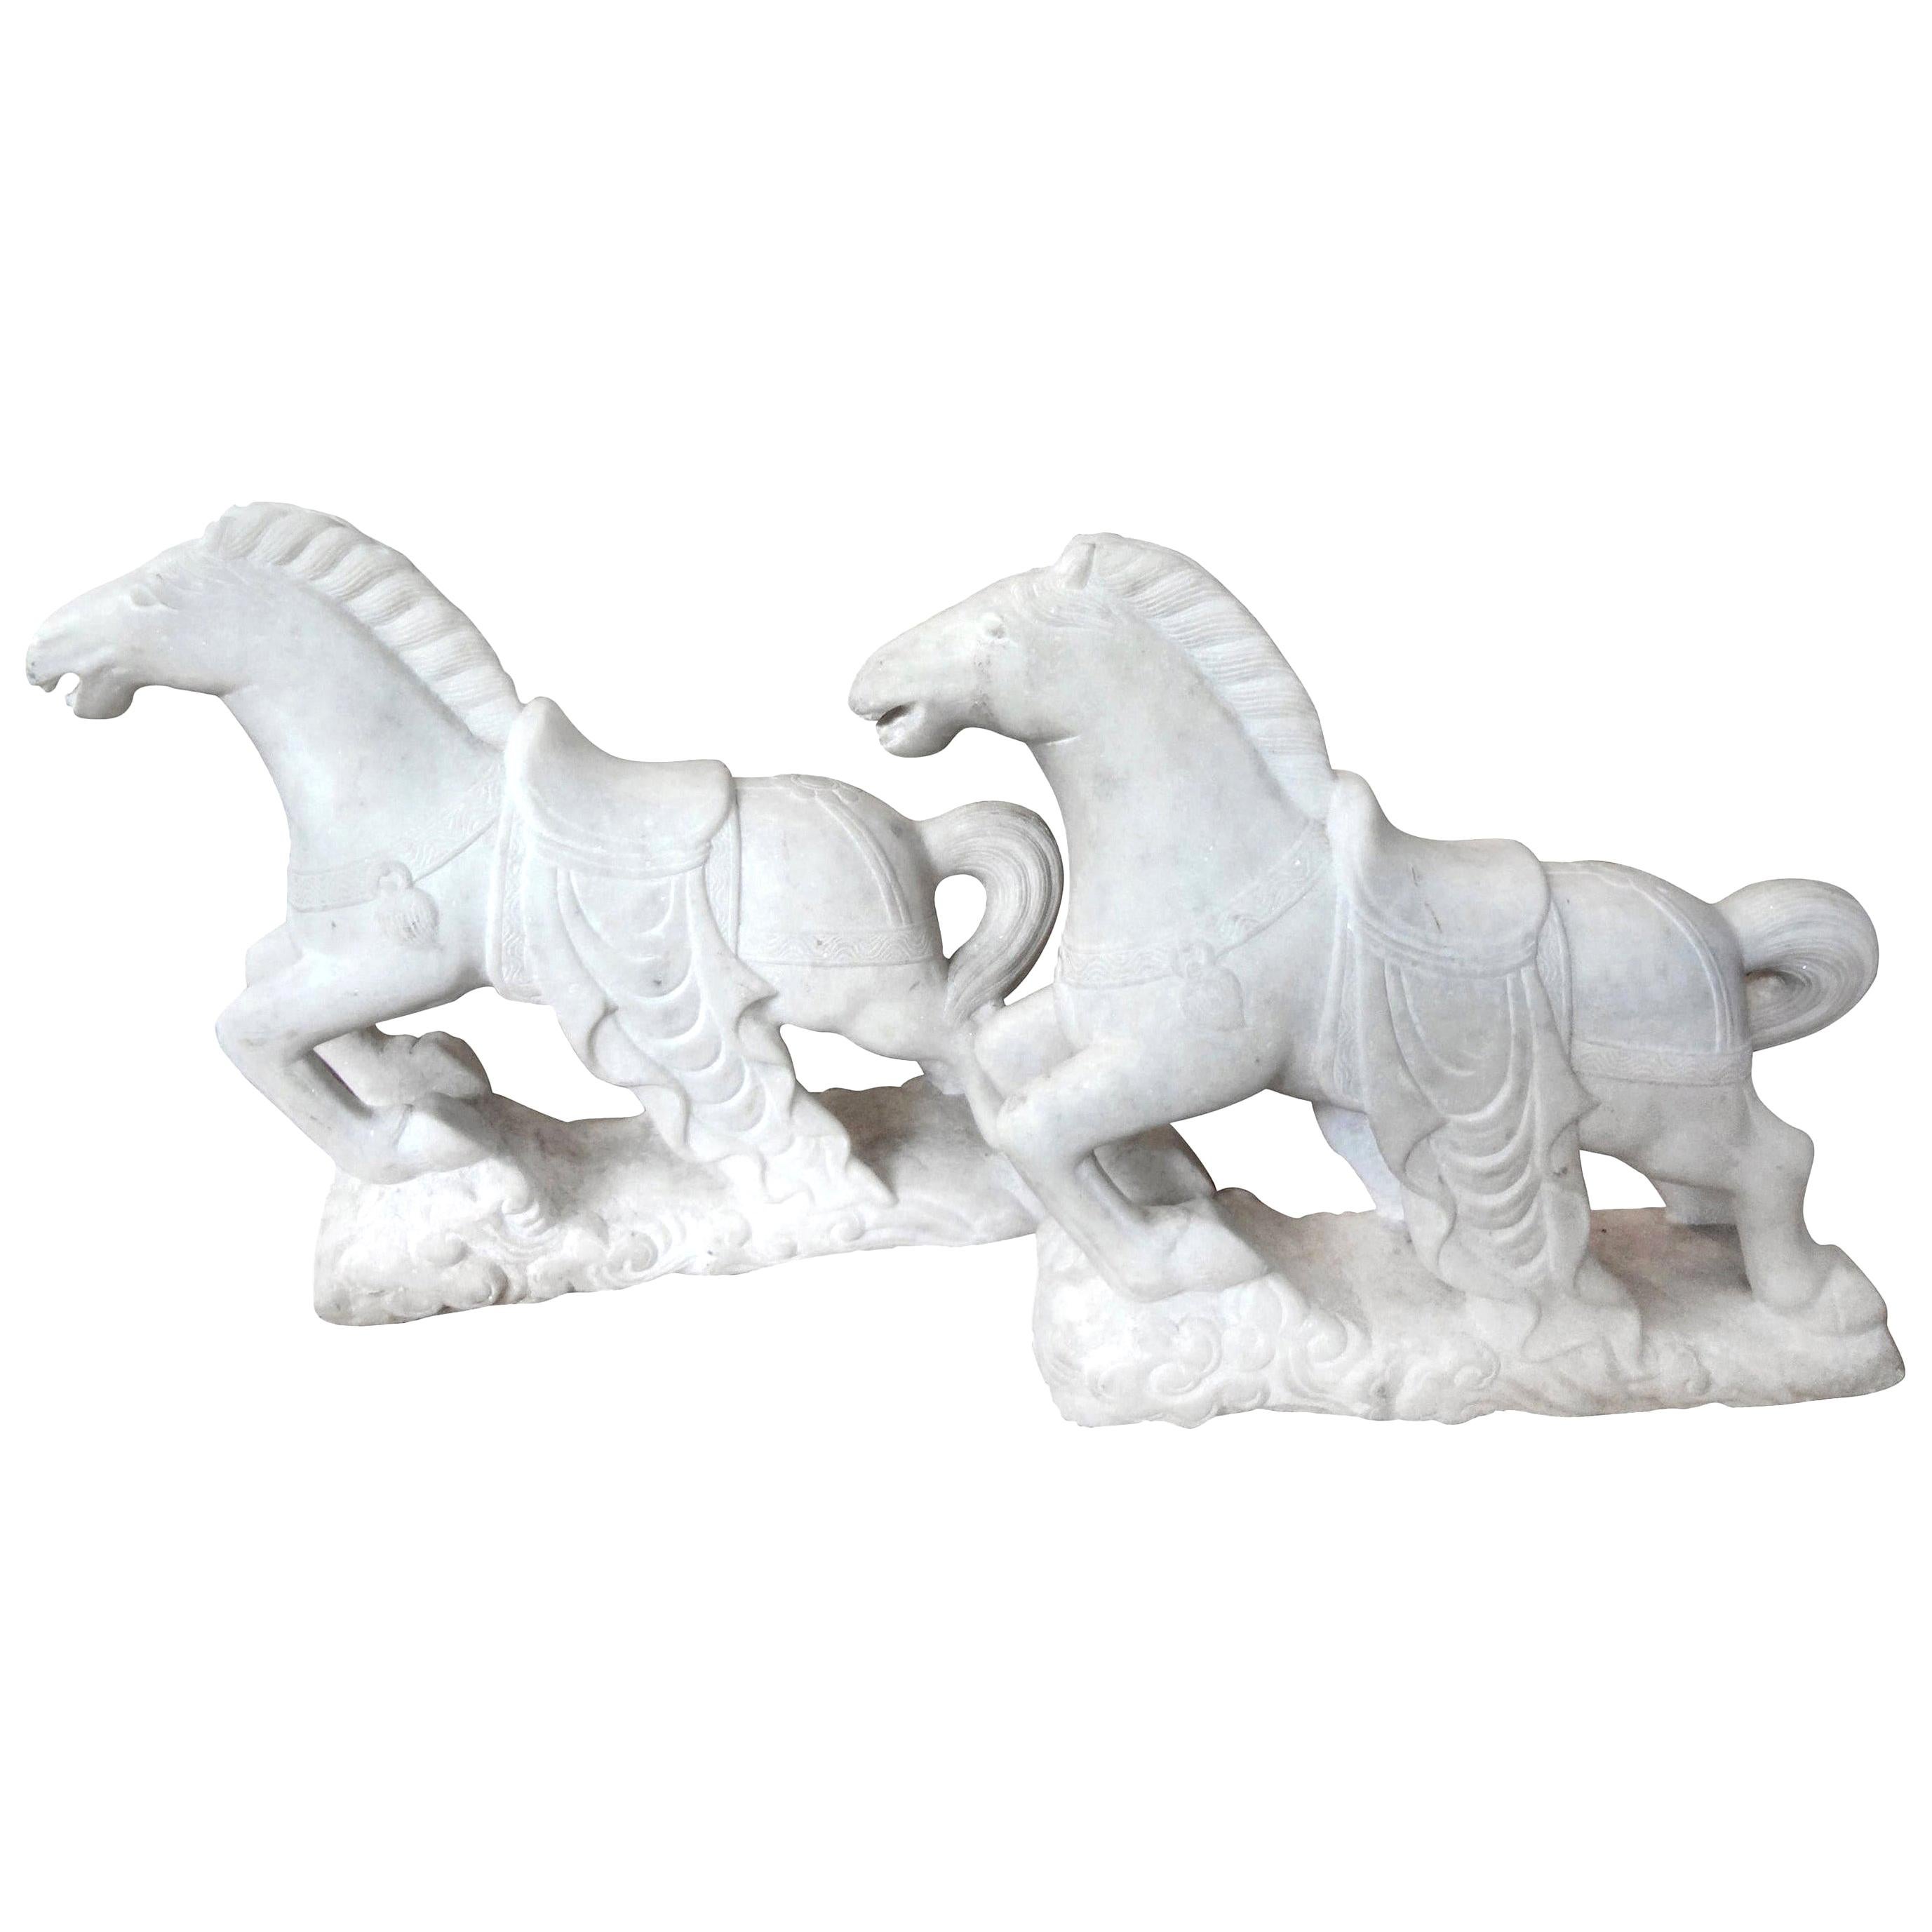 Pair of Art Deco Carved Marble Horse Sculptures